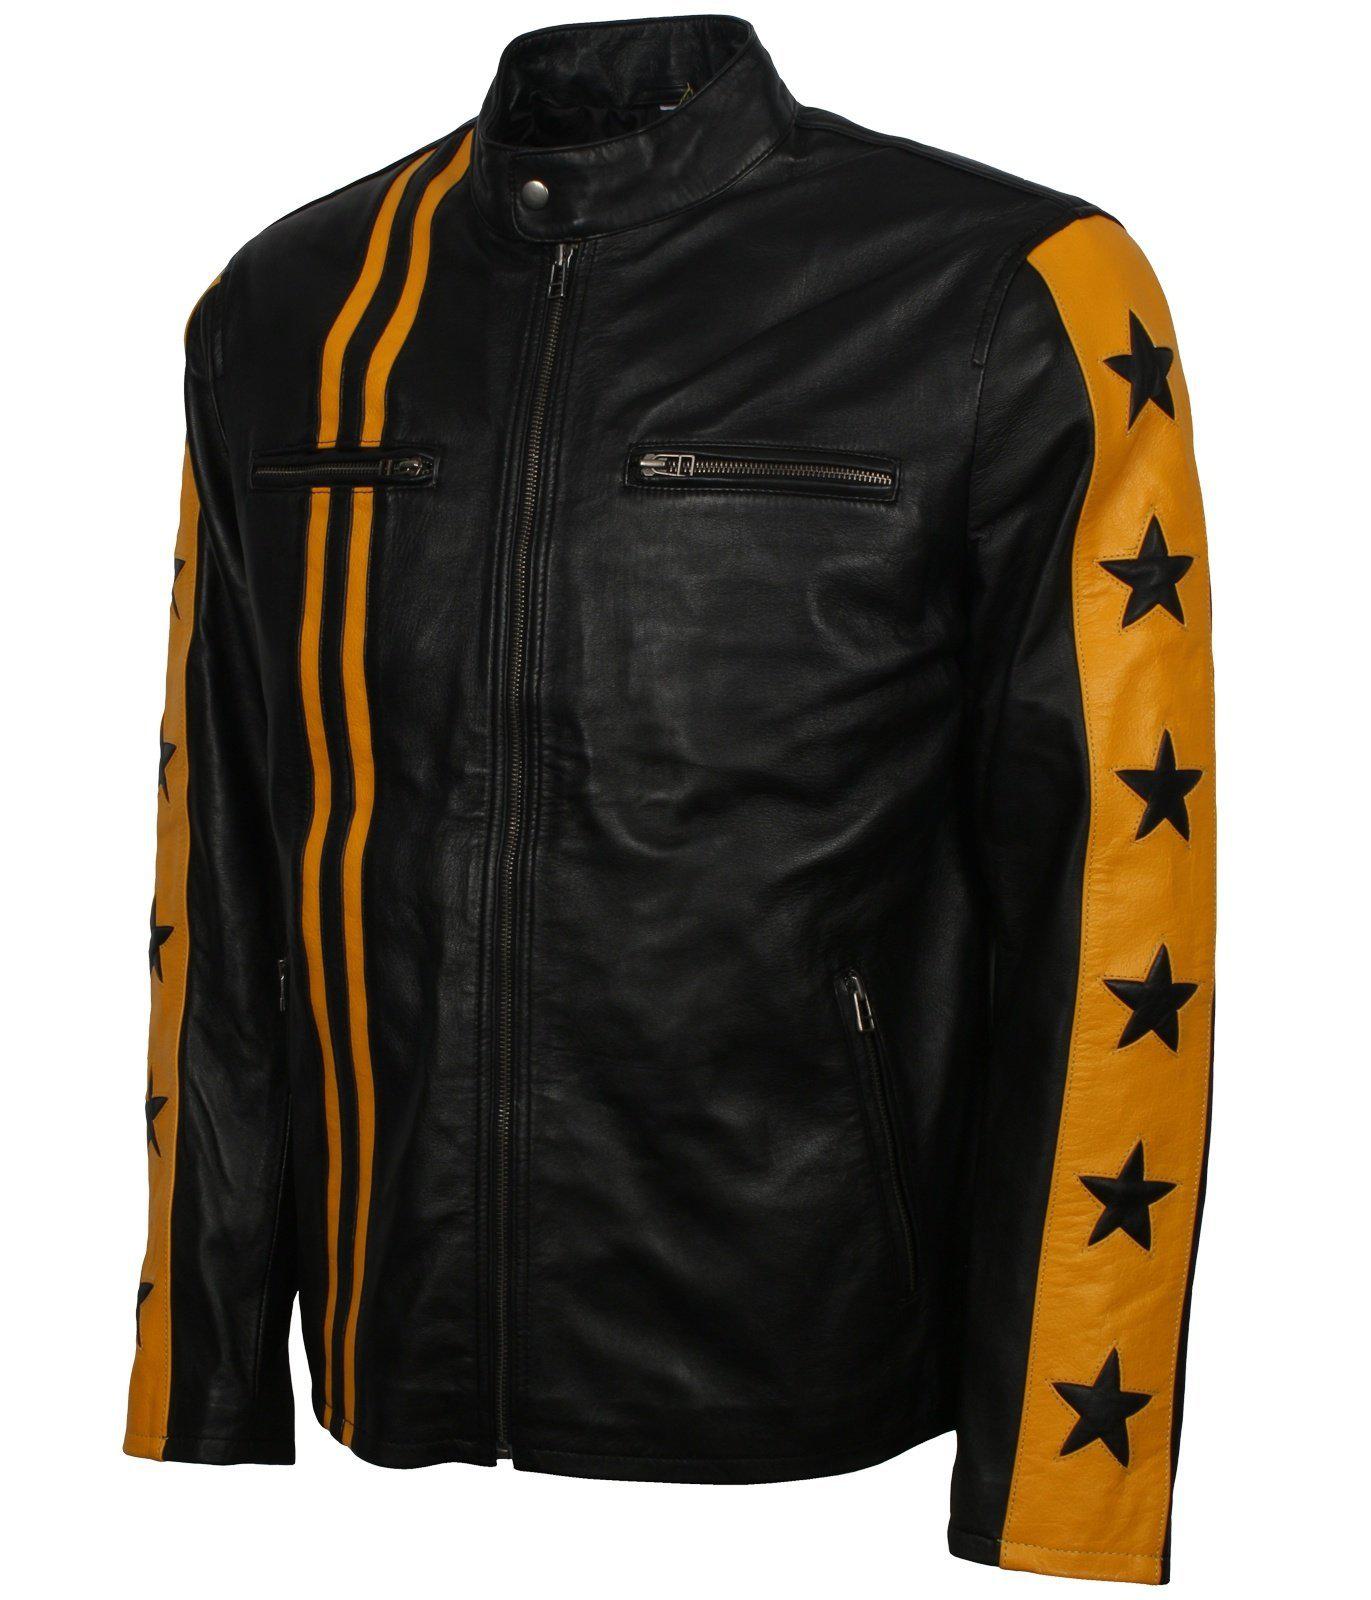 Yellow and Black Leather Jacket with Stars and Stripes 